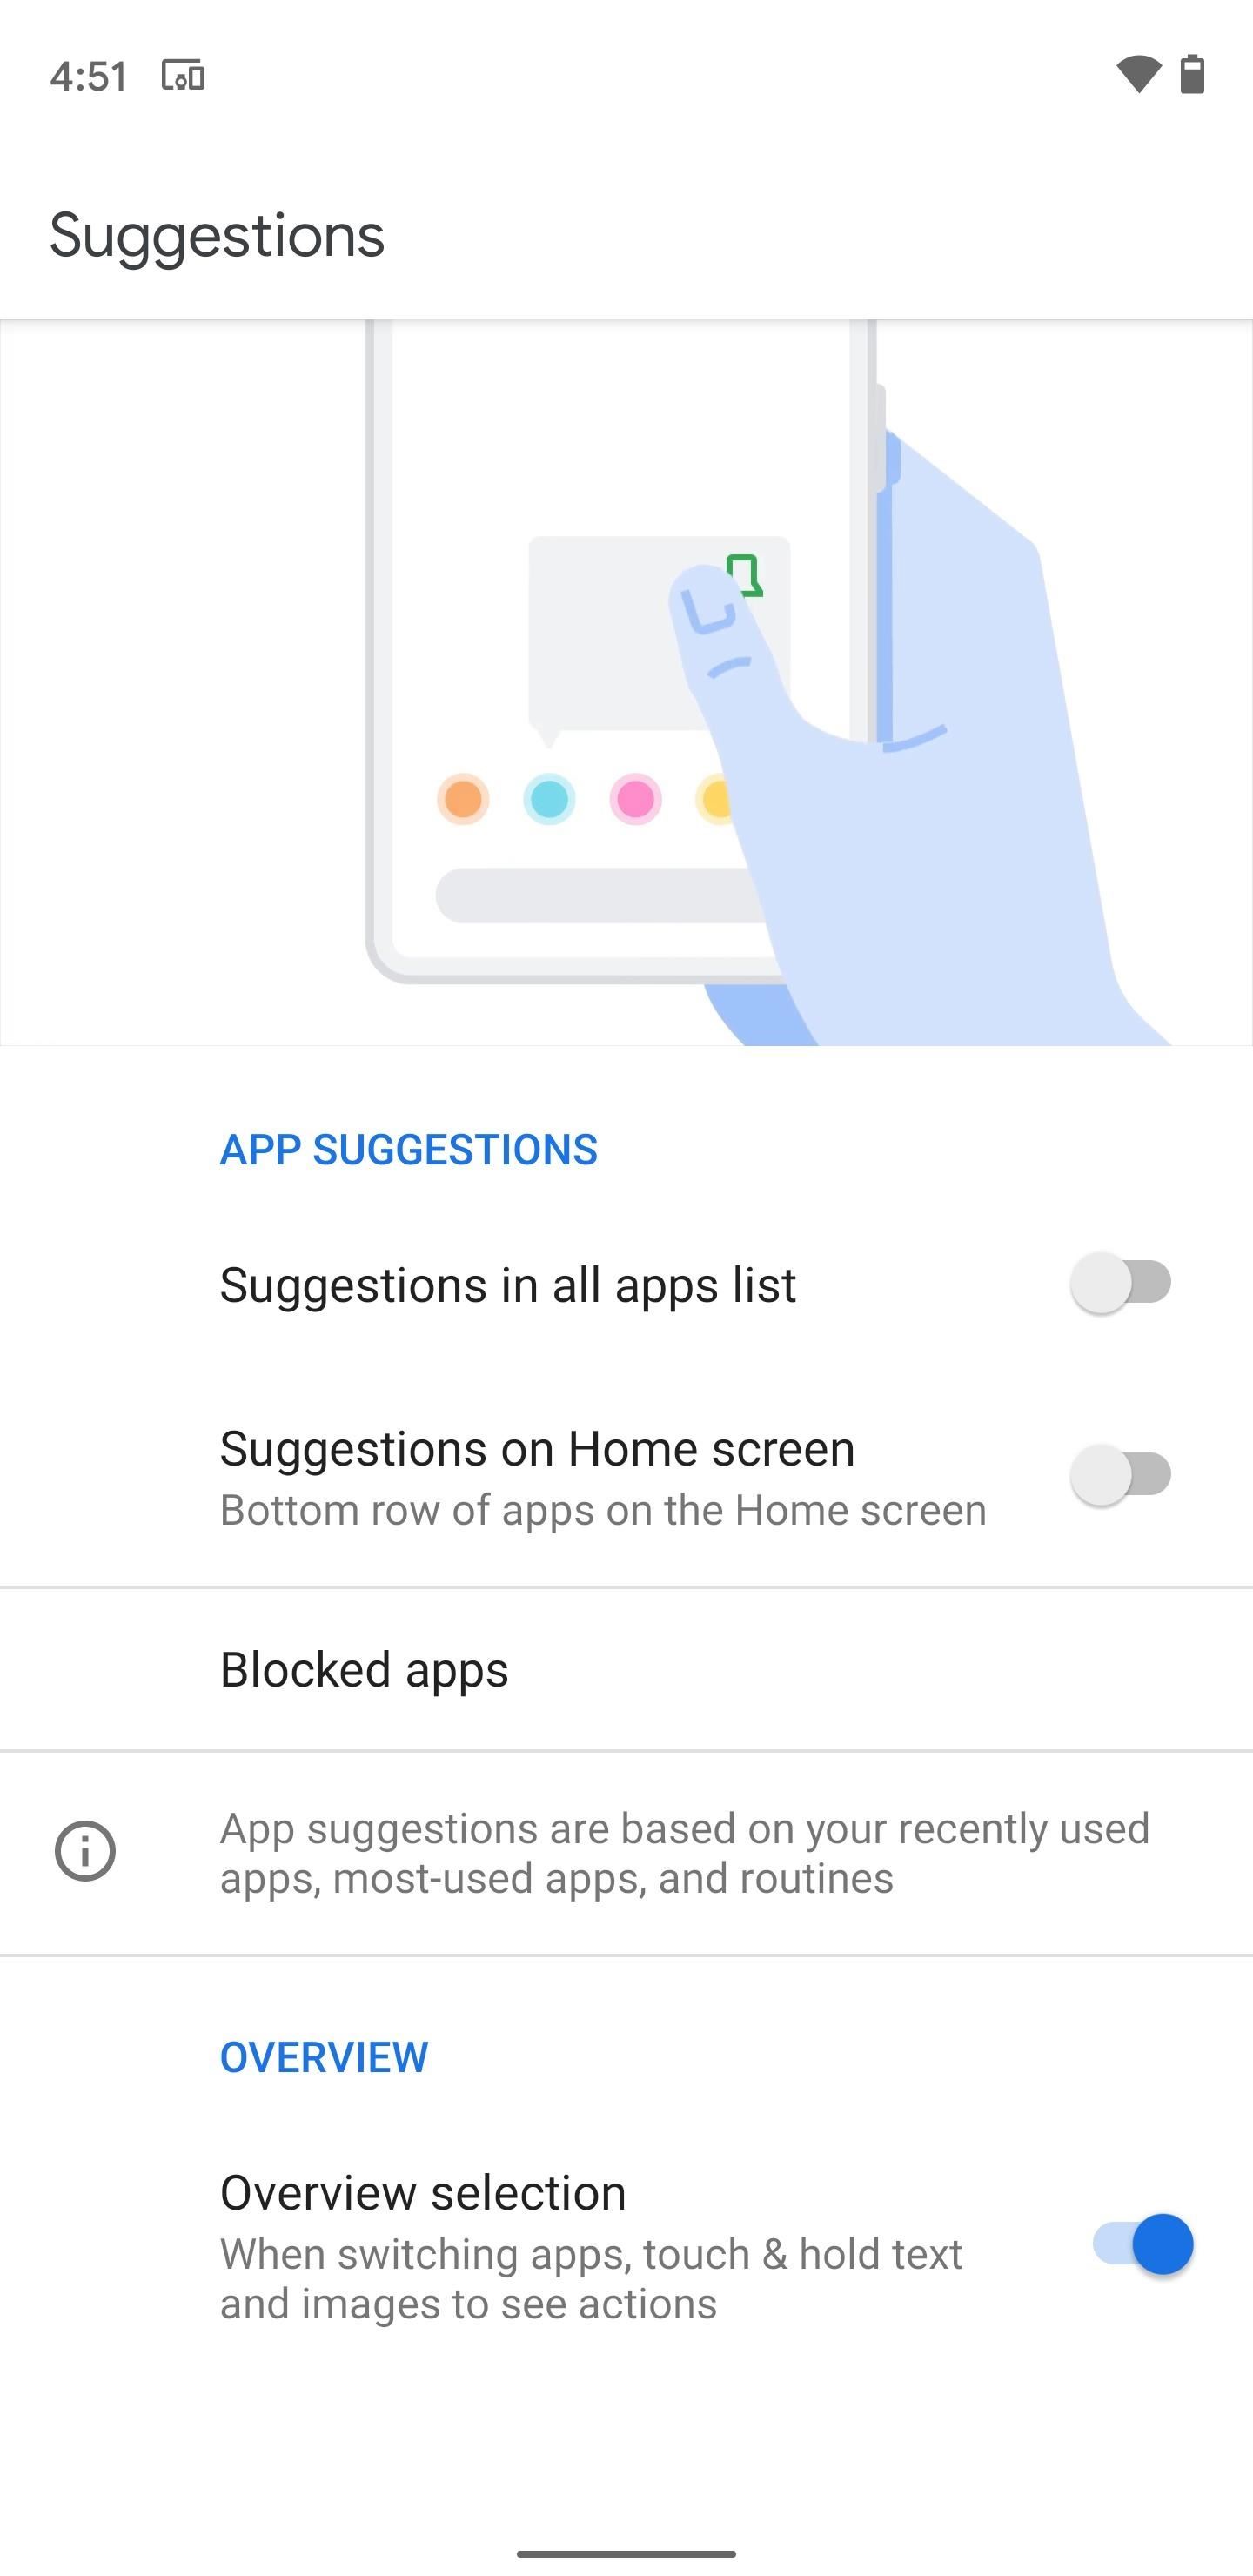 How to Add Predictive App Shortcuts to Your Pixel's Home Screen Dock